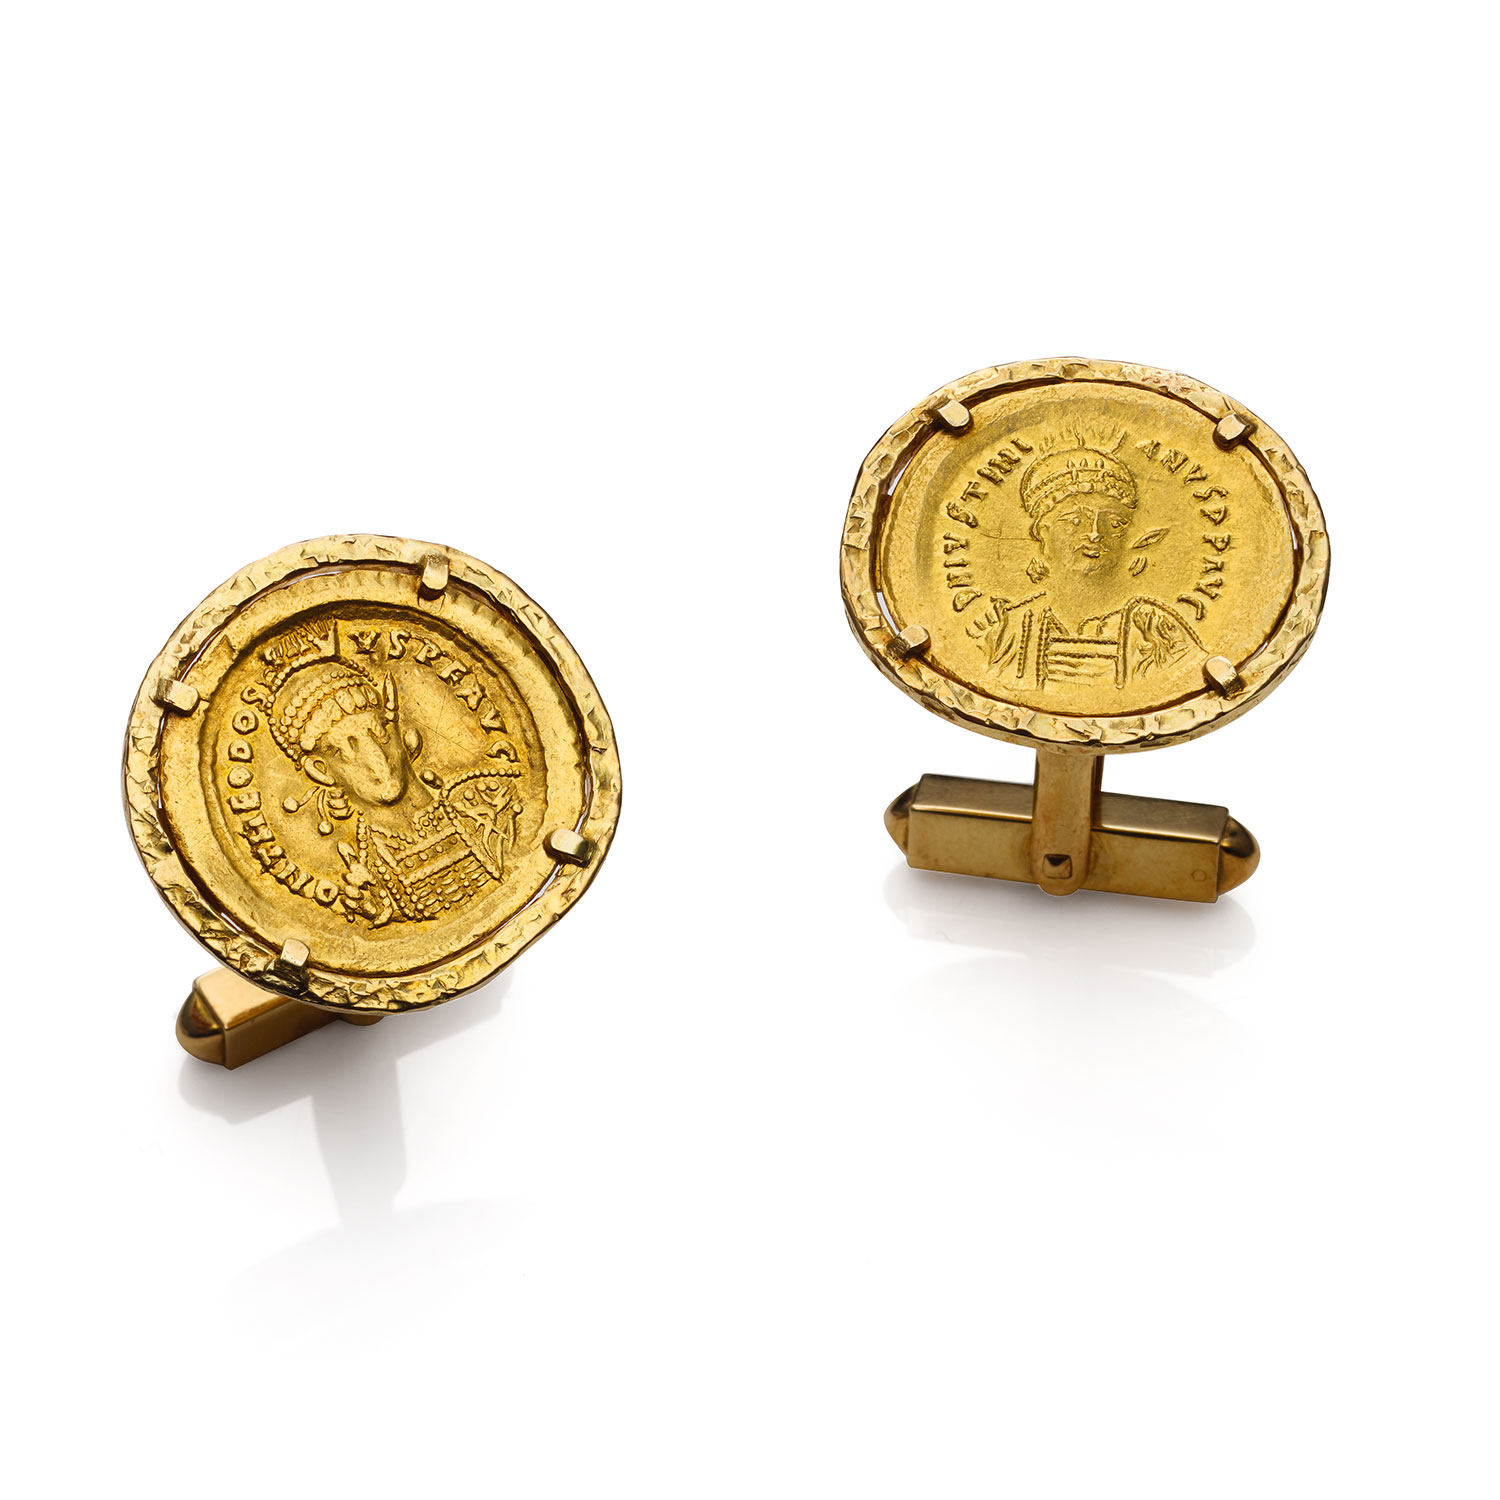 PATEK PHILIPPE ANCIENT COIN CUFFLINKS - Collectability